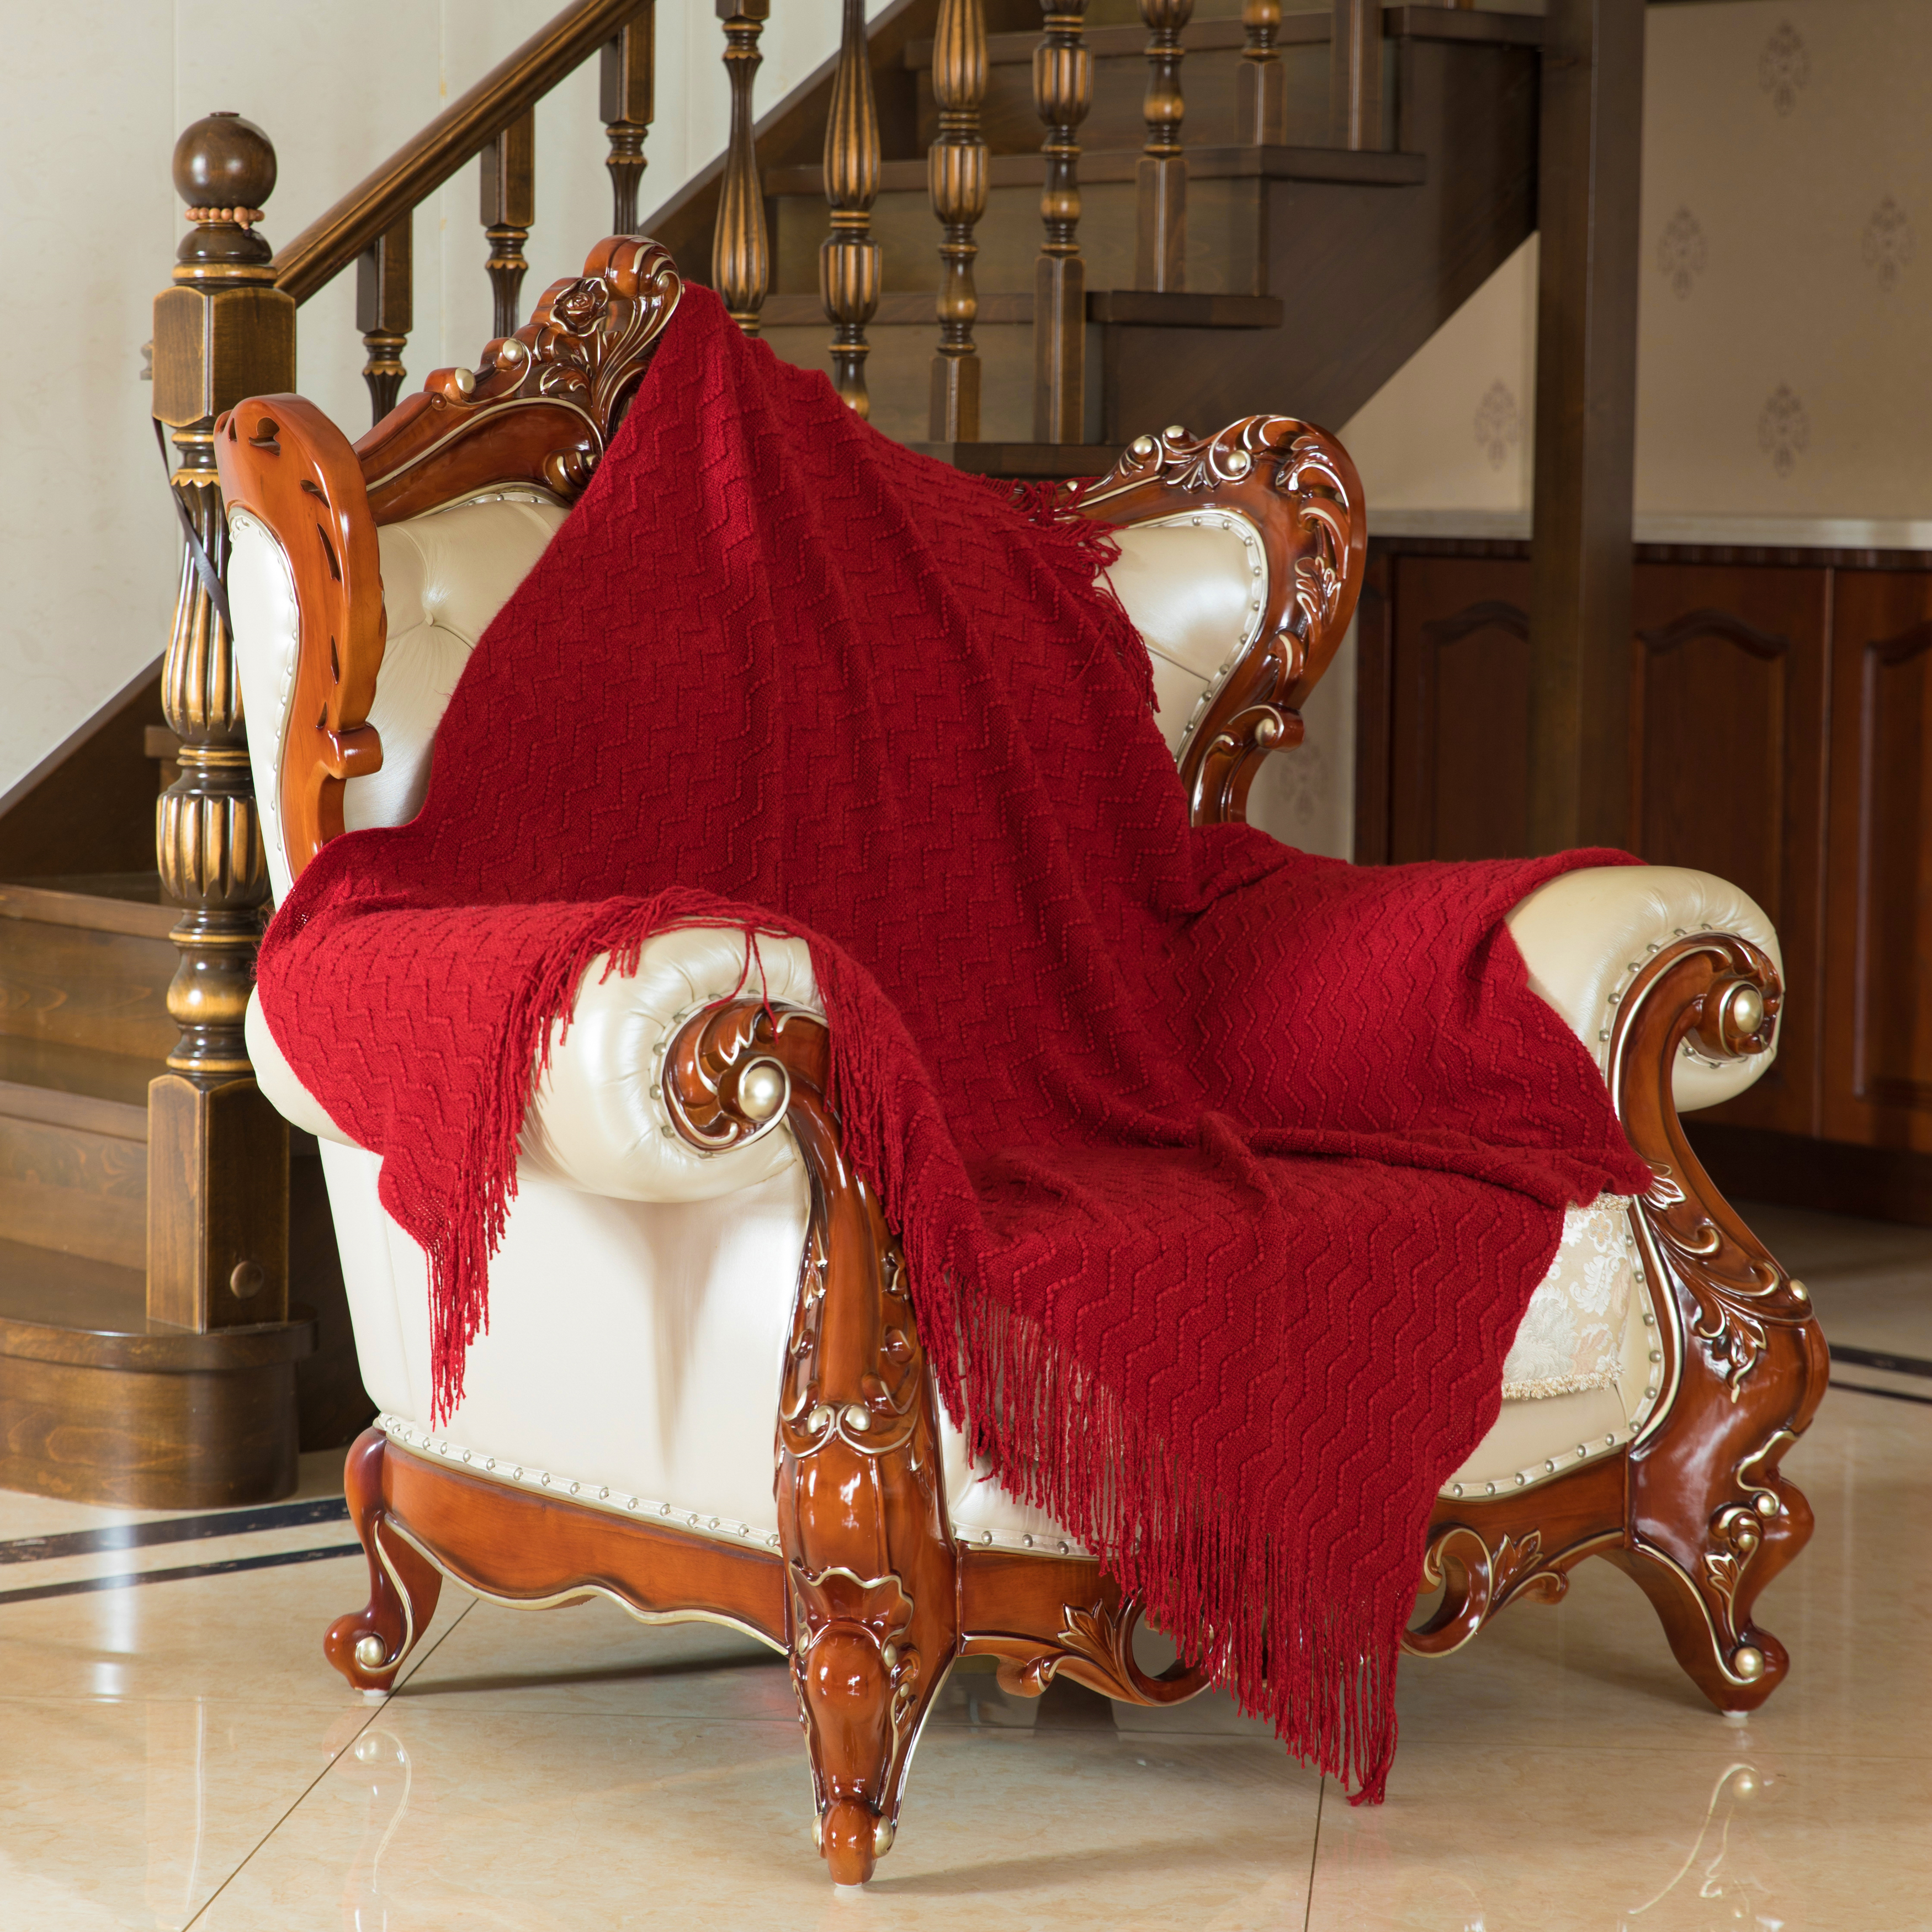 Hot Red Decorative Throw Blanket with Fringe